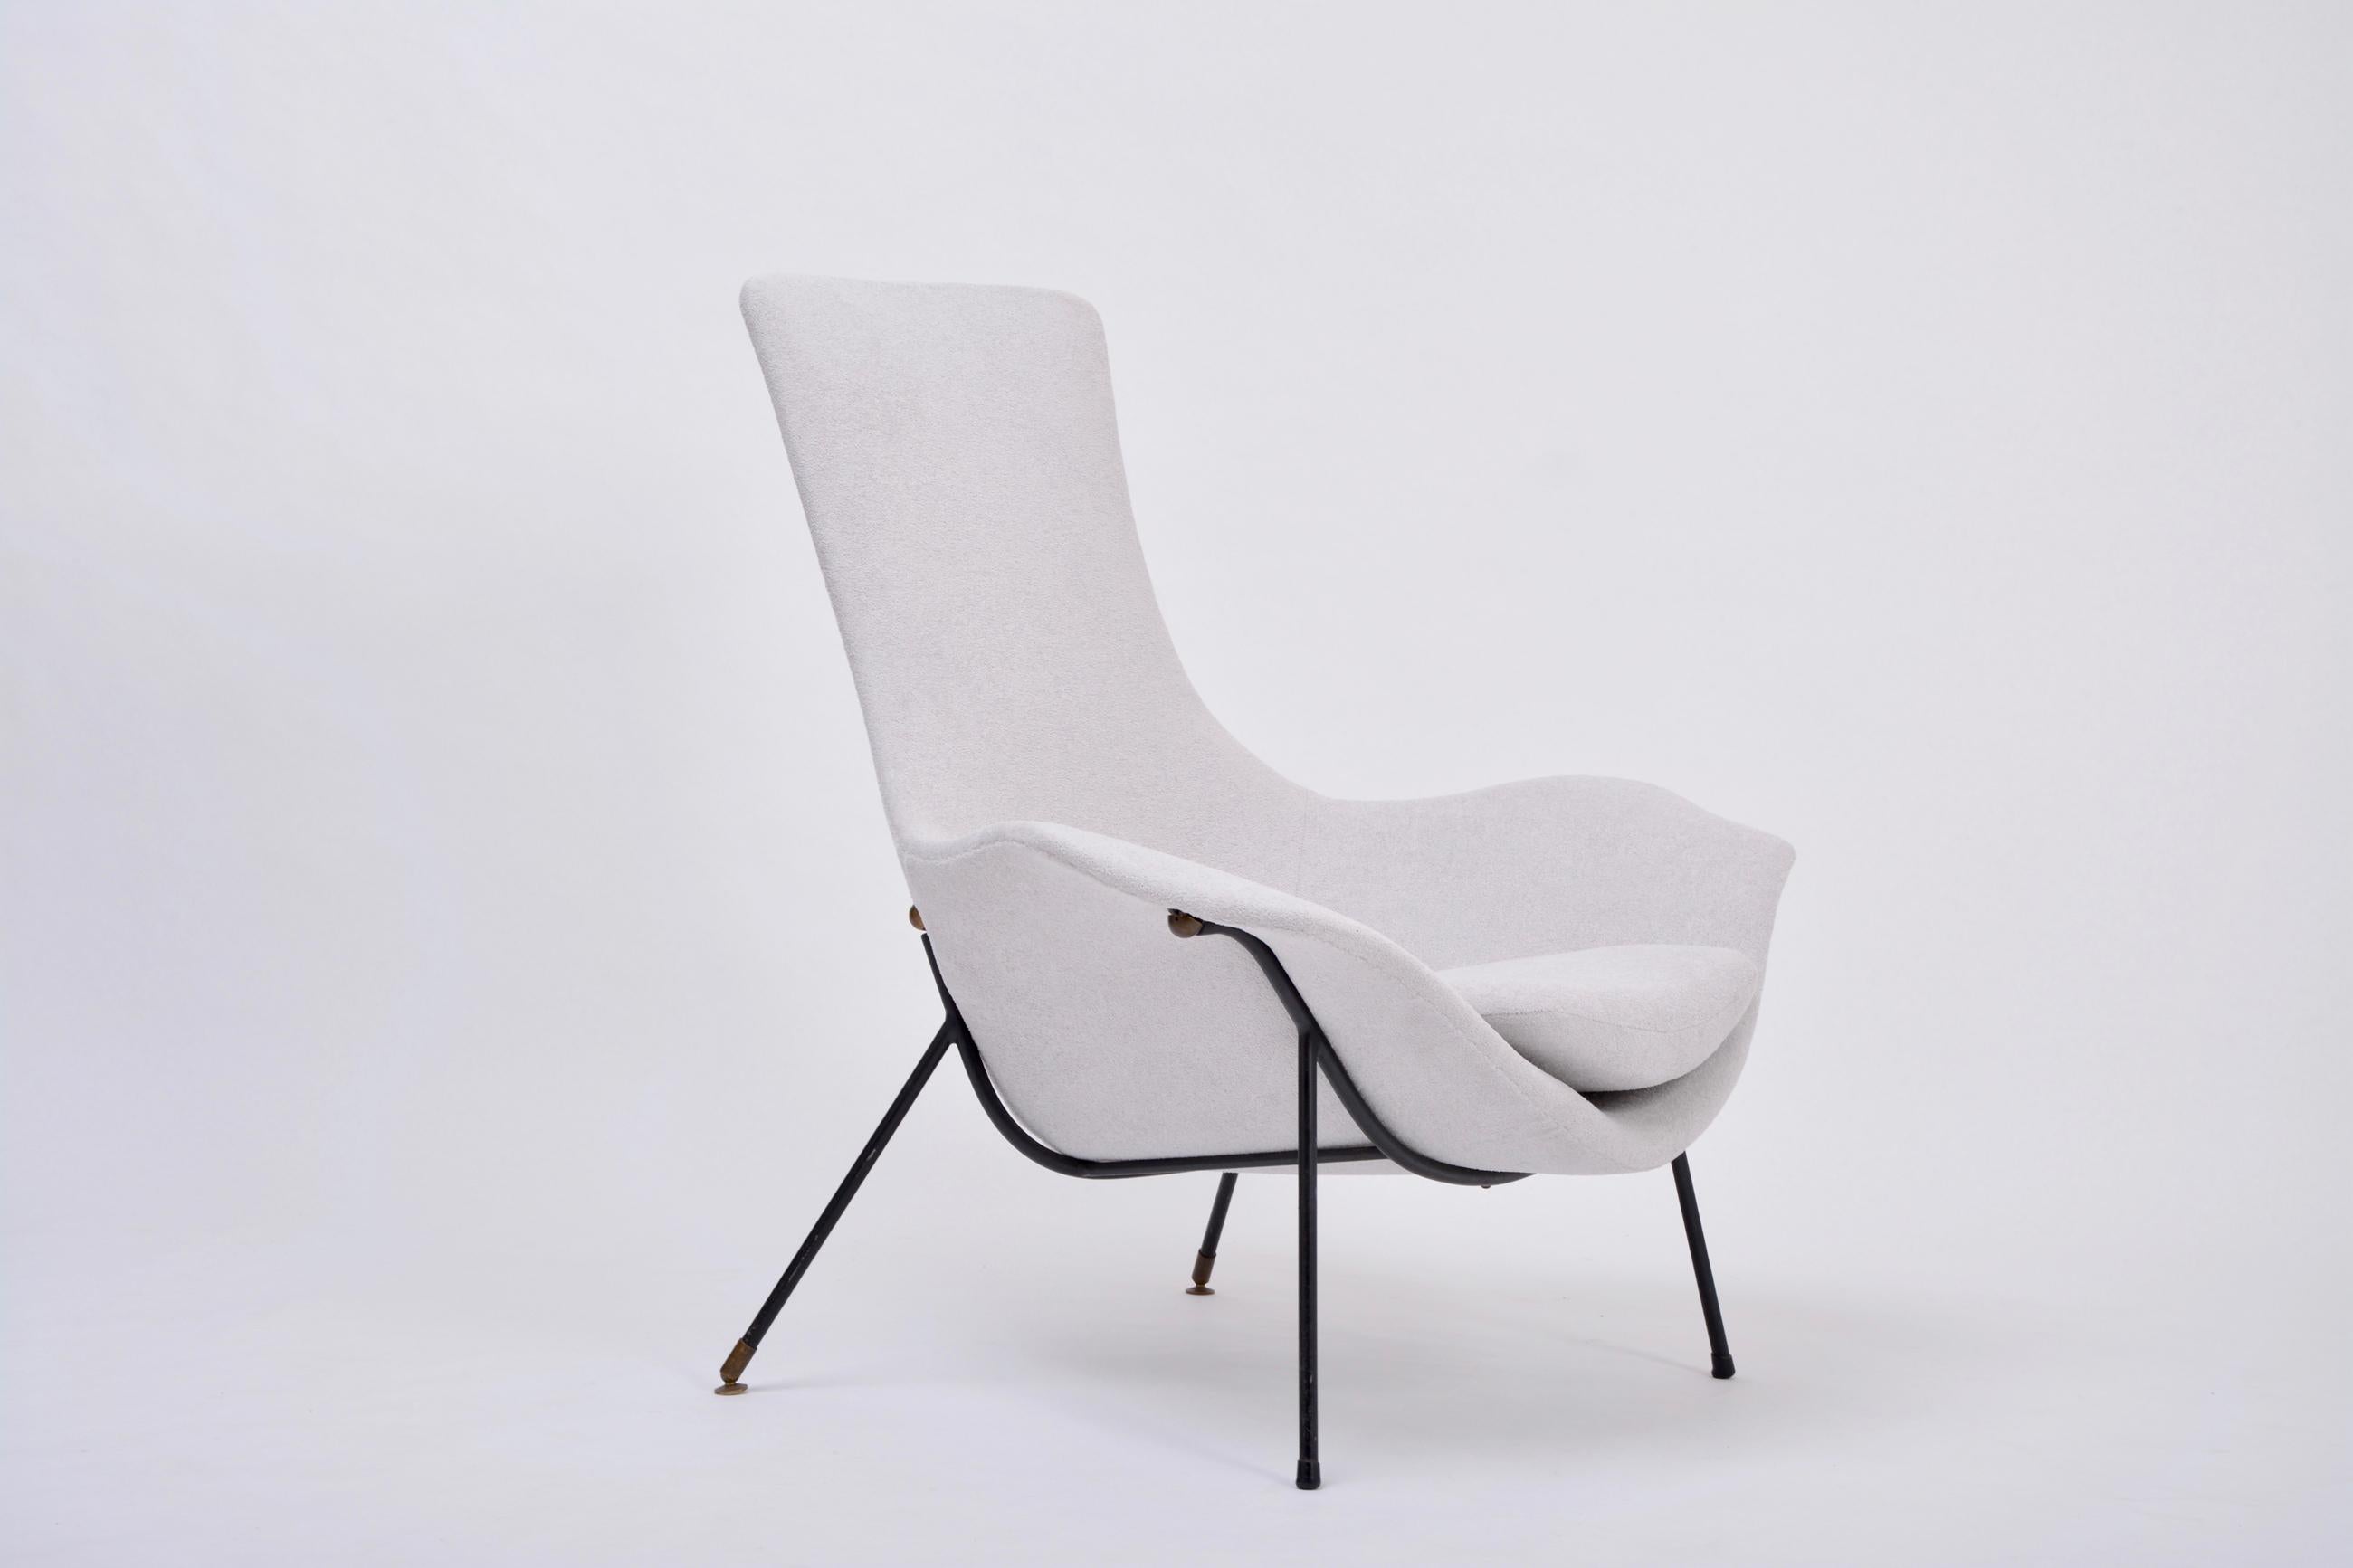 Grey Italian Mid-Century Modern lounge chair by Augusto Bozzi for Fratelli Saporiti

Lounge chair designed by Augusto Bozzi and produced by Fratelli Saporiti in Italy in the 1950s. The base is made of lacquered metal with brass feet and details.